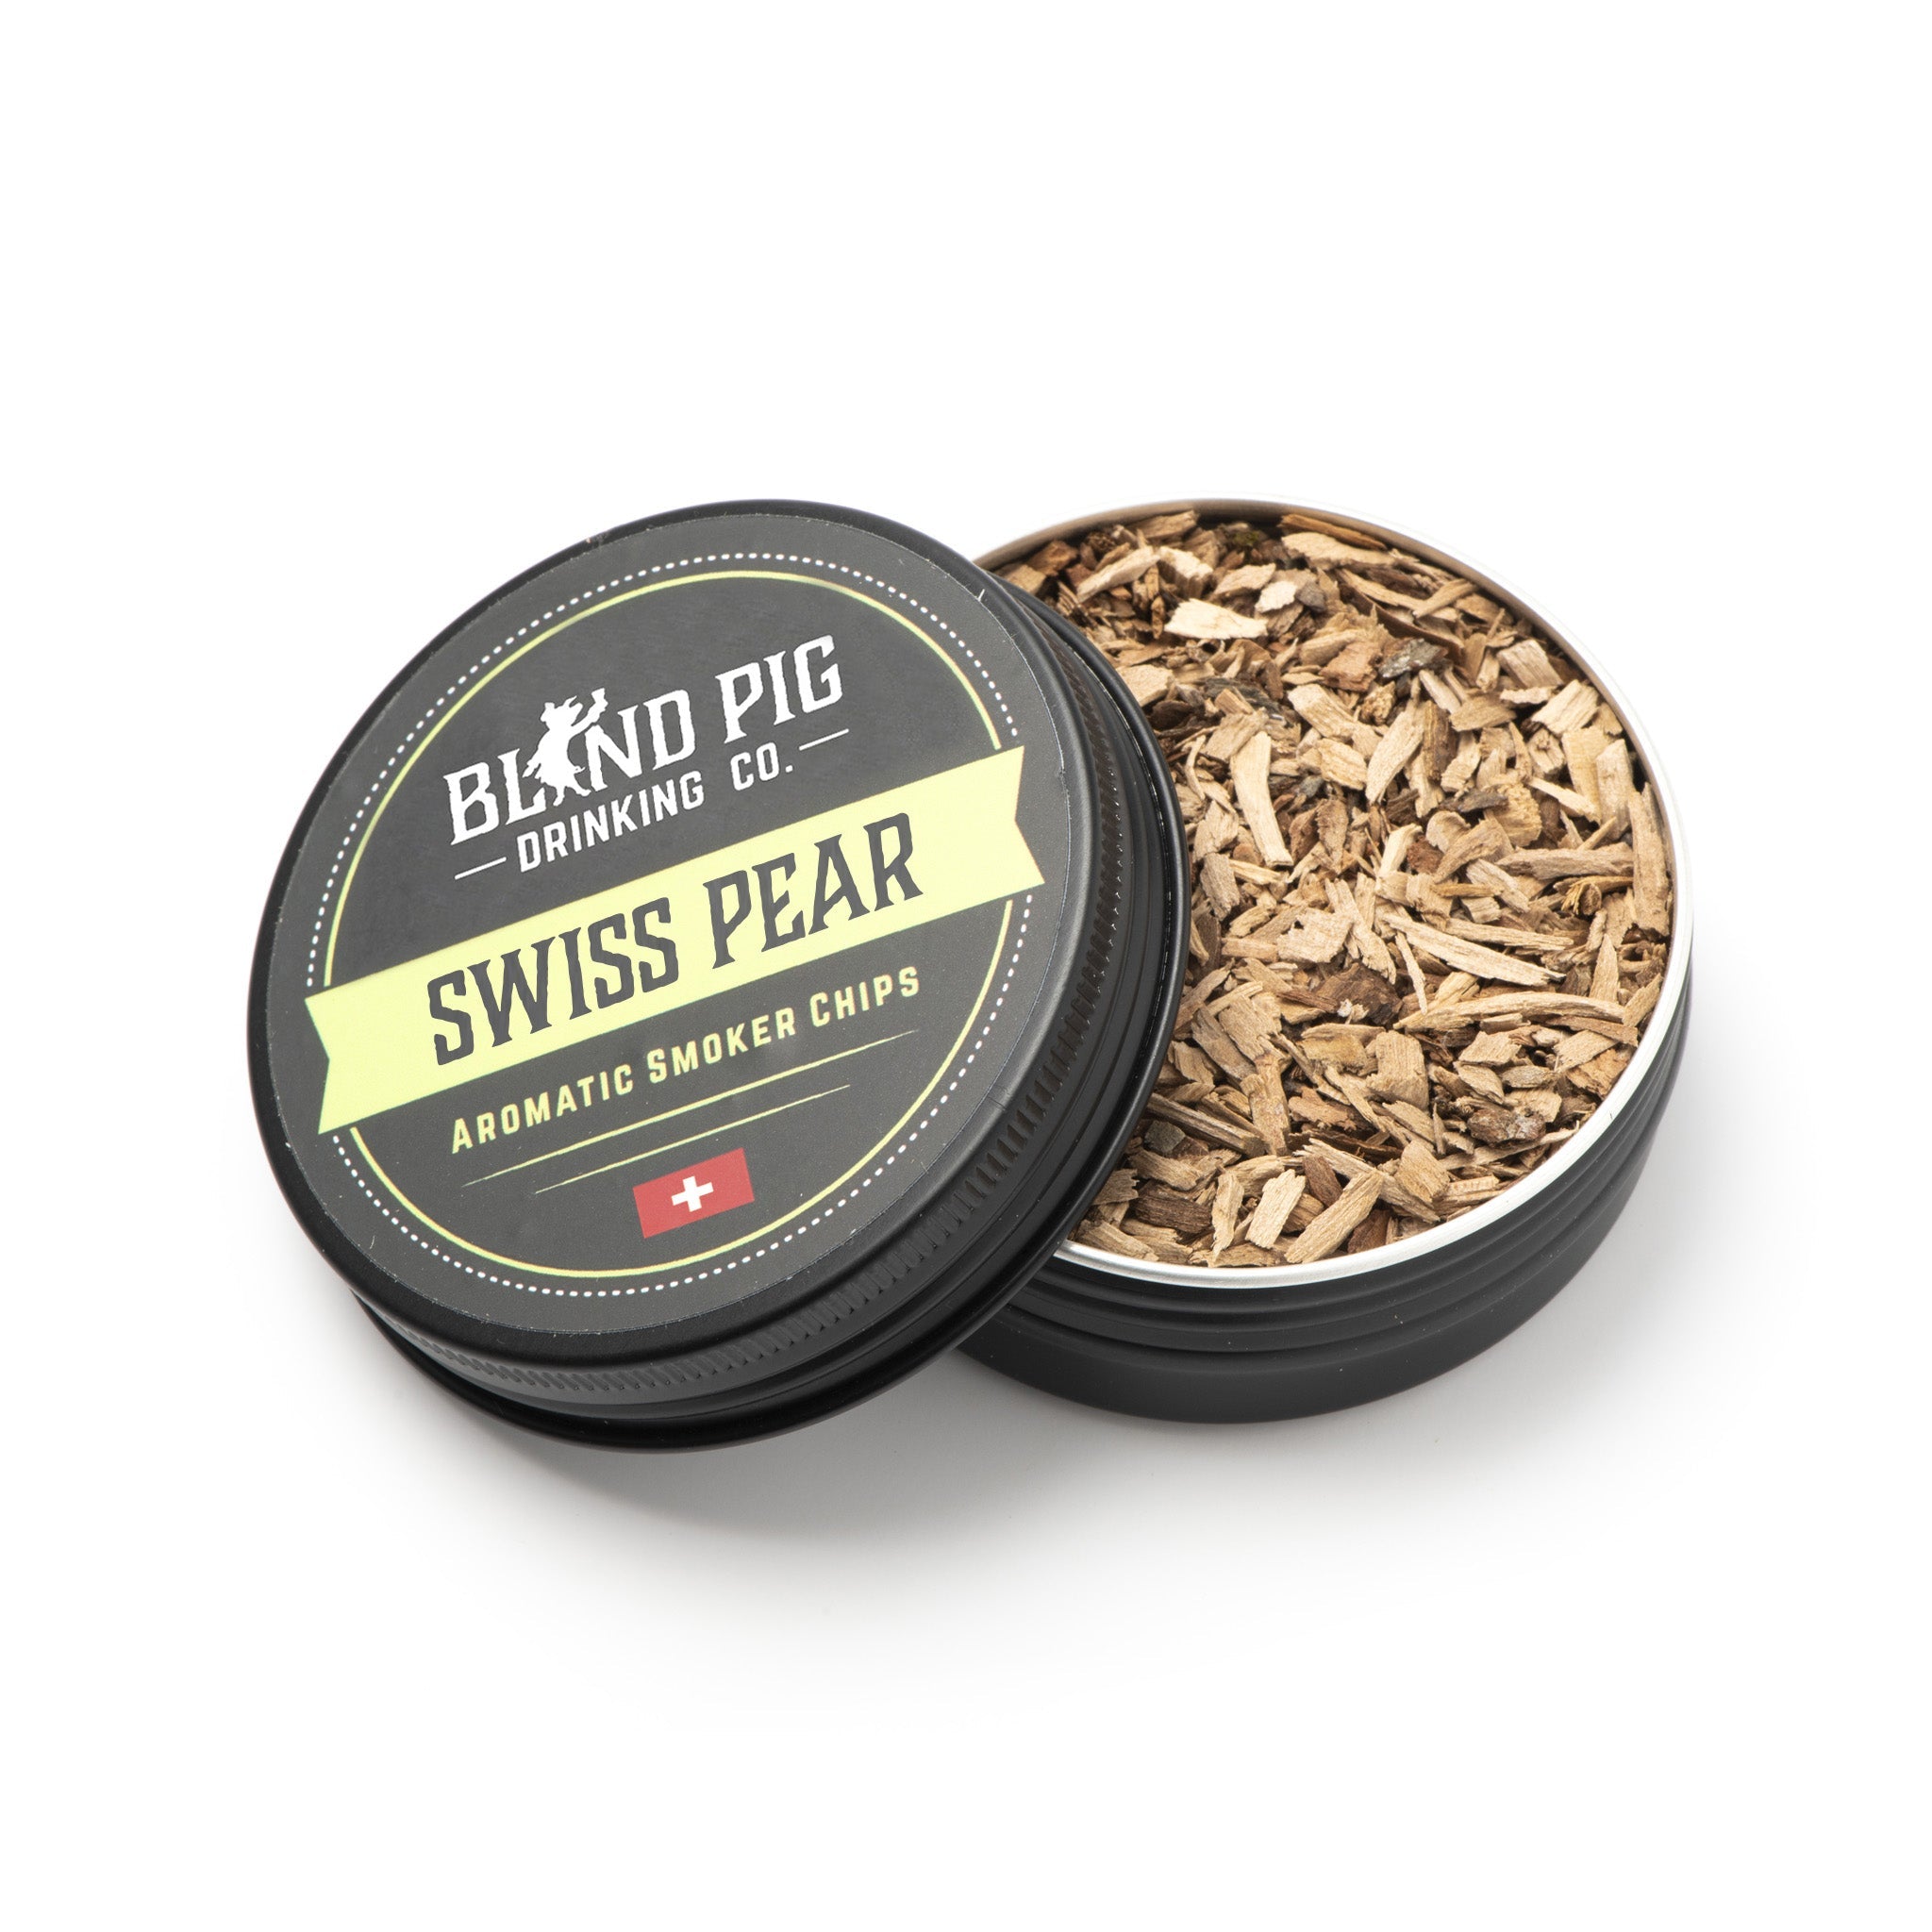 Swiss Pear Aromatic Smoker Chips - Blind Pig Drinking Co.